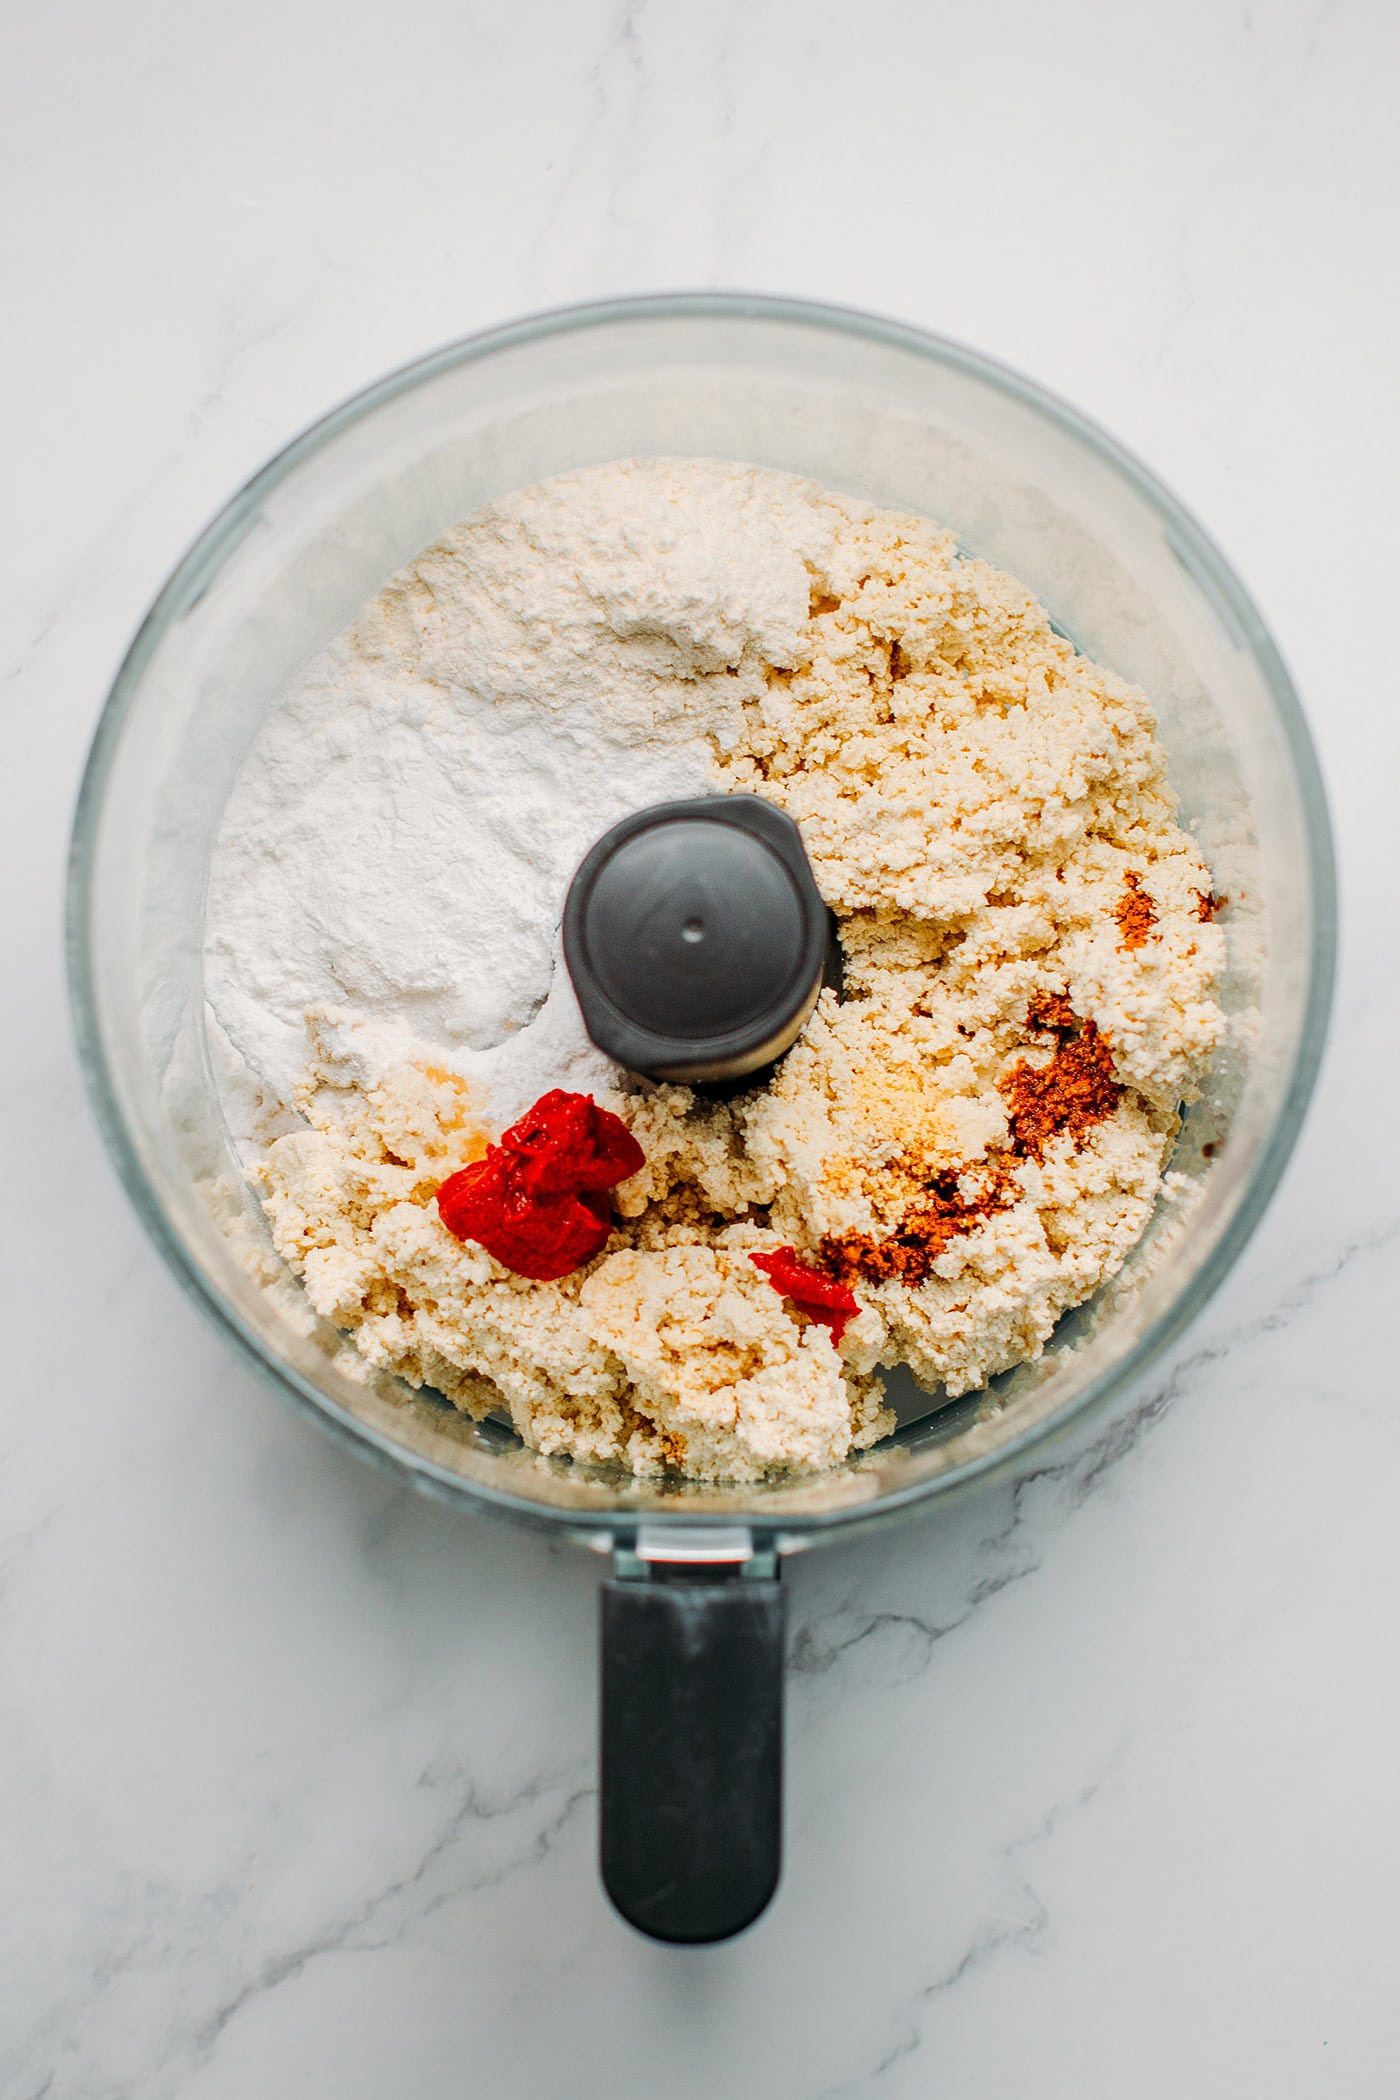 Tofu, flour, tapioca starch and spices in a food processor